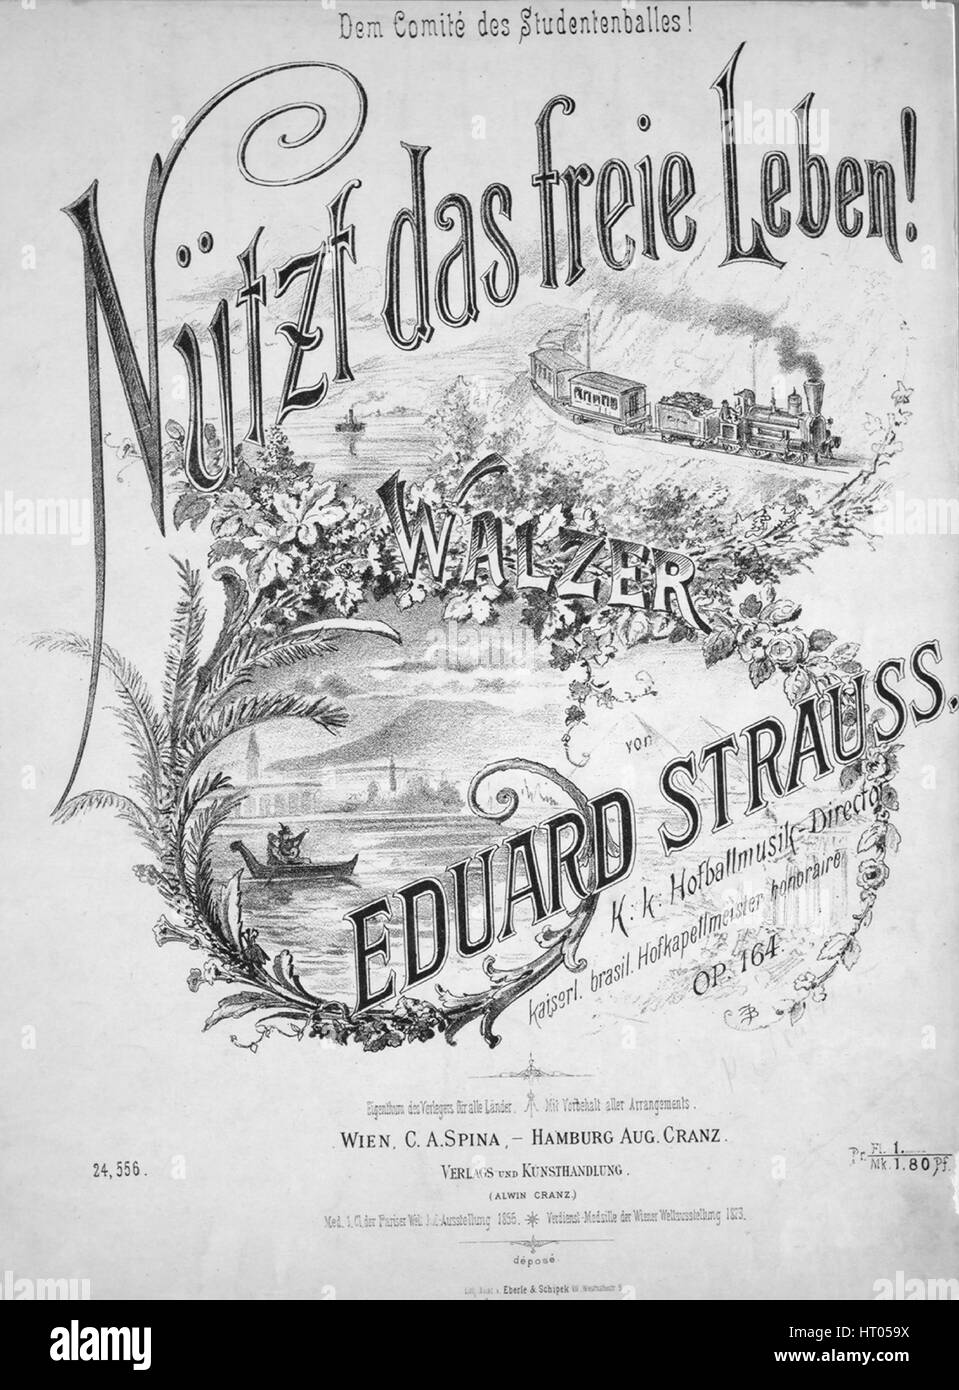 Sheet music cover image of the song 'Nutzt das frei leben! Dem Comite des Studentenballes! Walzer', with original authorship notes reading 'Eduard Strauss, kk Hofballmusik - Director, kais  brasil Hofkapellmeister honoraire', 1855. The publisher is listed as 'C.A. Spina (Alwin Cranz)', the form of composition is 'four sectional waltzes, introduction and coda', the instrumentation is 'piano', the first line reads 'None', and the illustration artist is listed as 'Lith. Anst. v. Eberle and Schipek VII Westbahnstr. 9'. Stock Photo